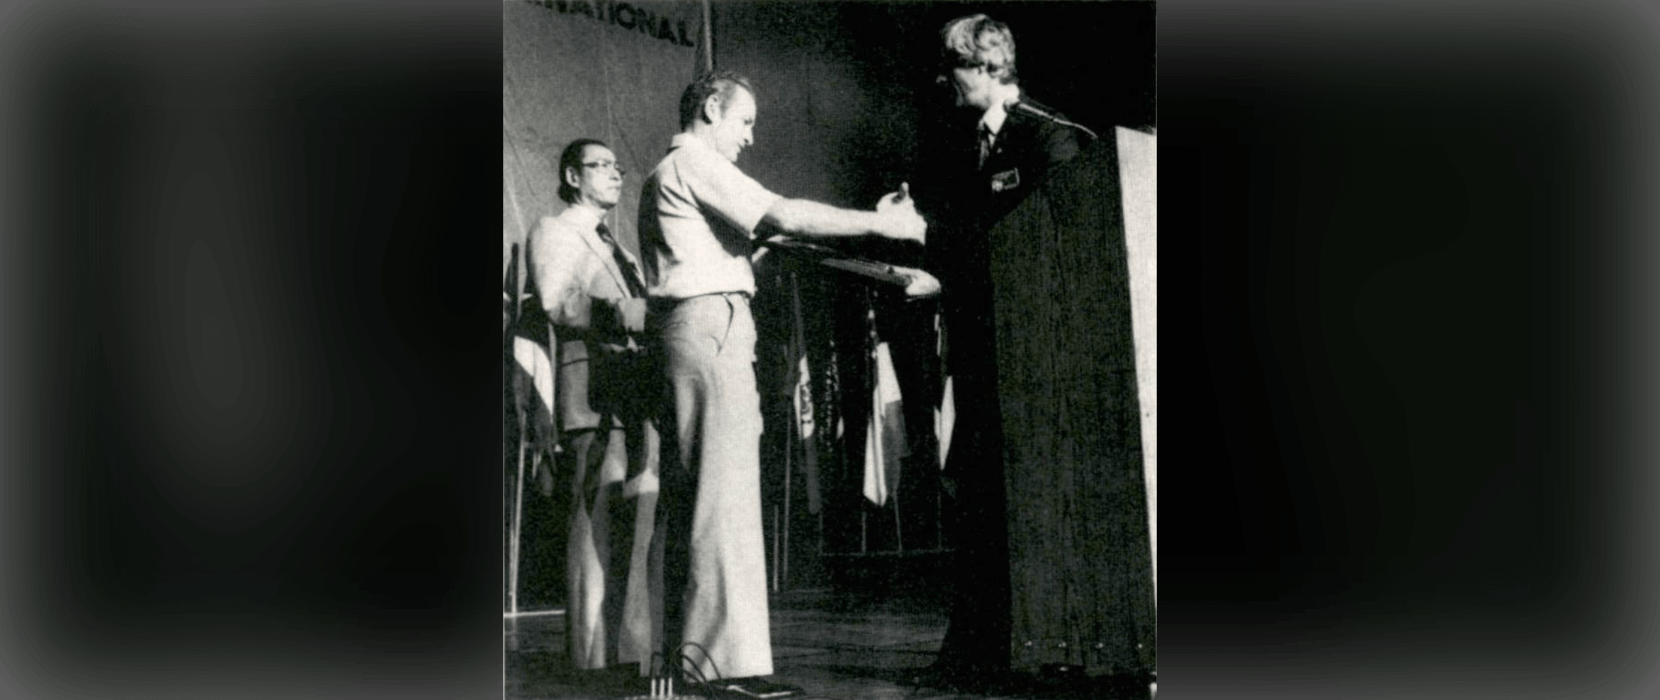 Black and white photo of a man accepting an award from another man